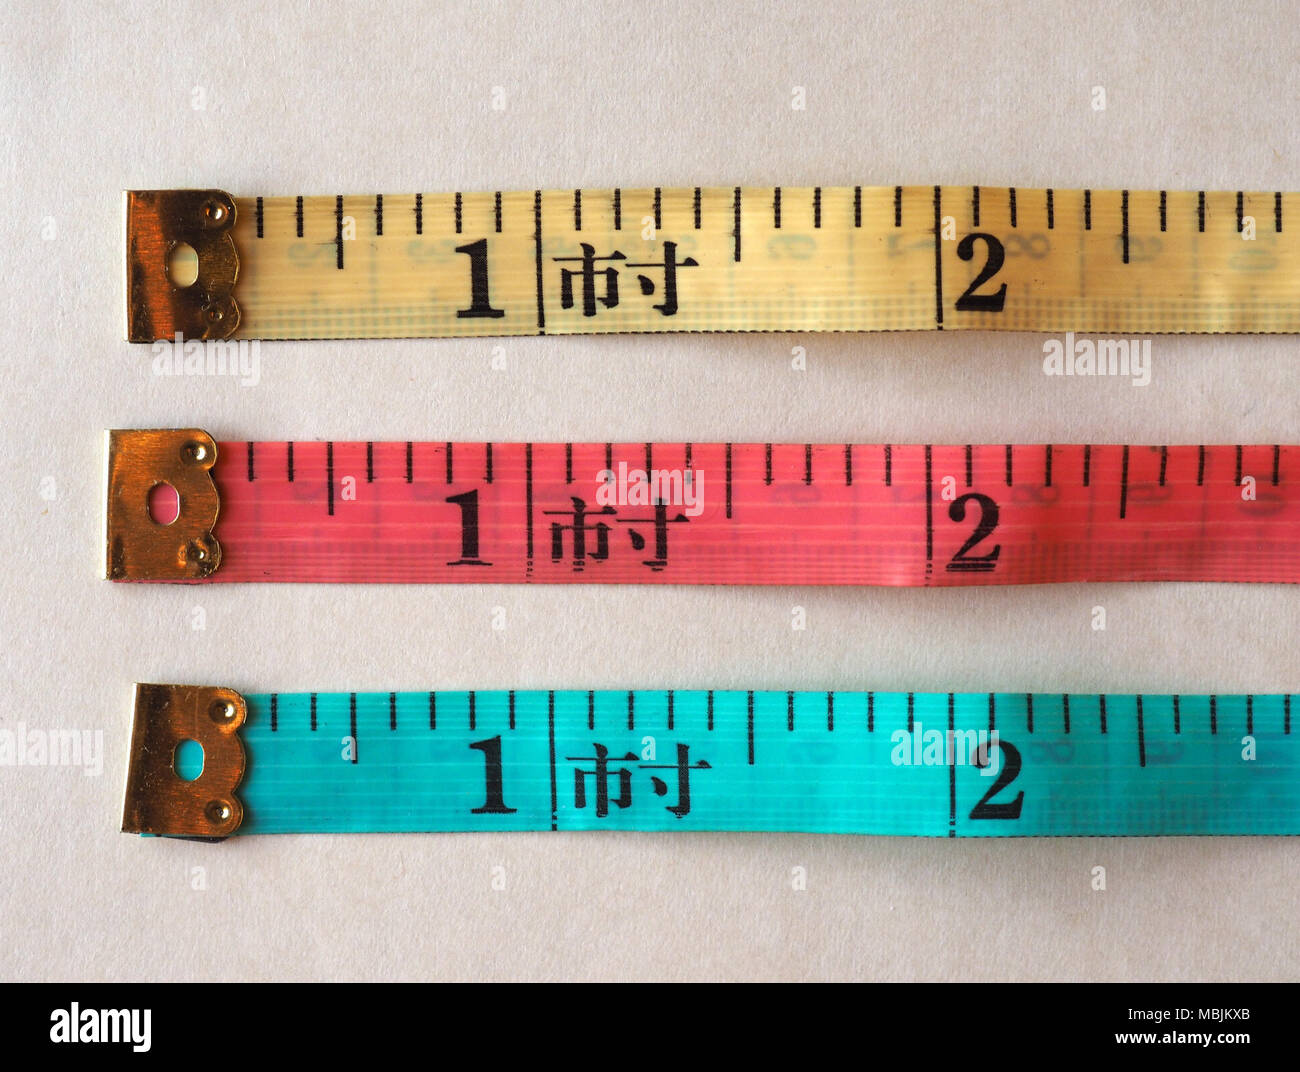 Tailor Tape Ruler in Cun (Chinese Inch) Stock Image - Image of